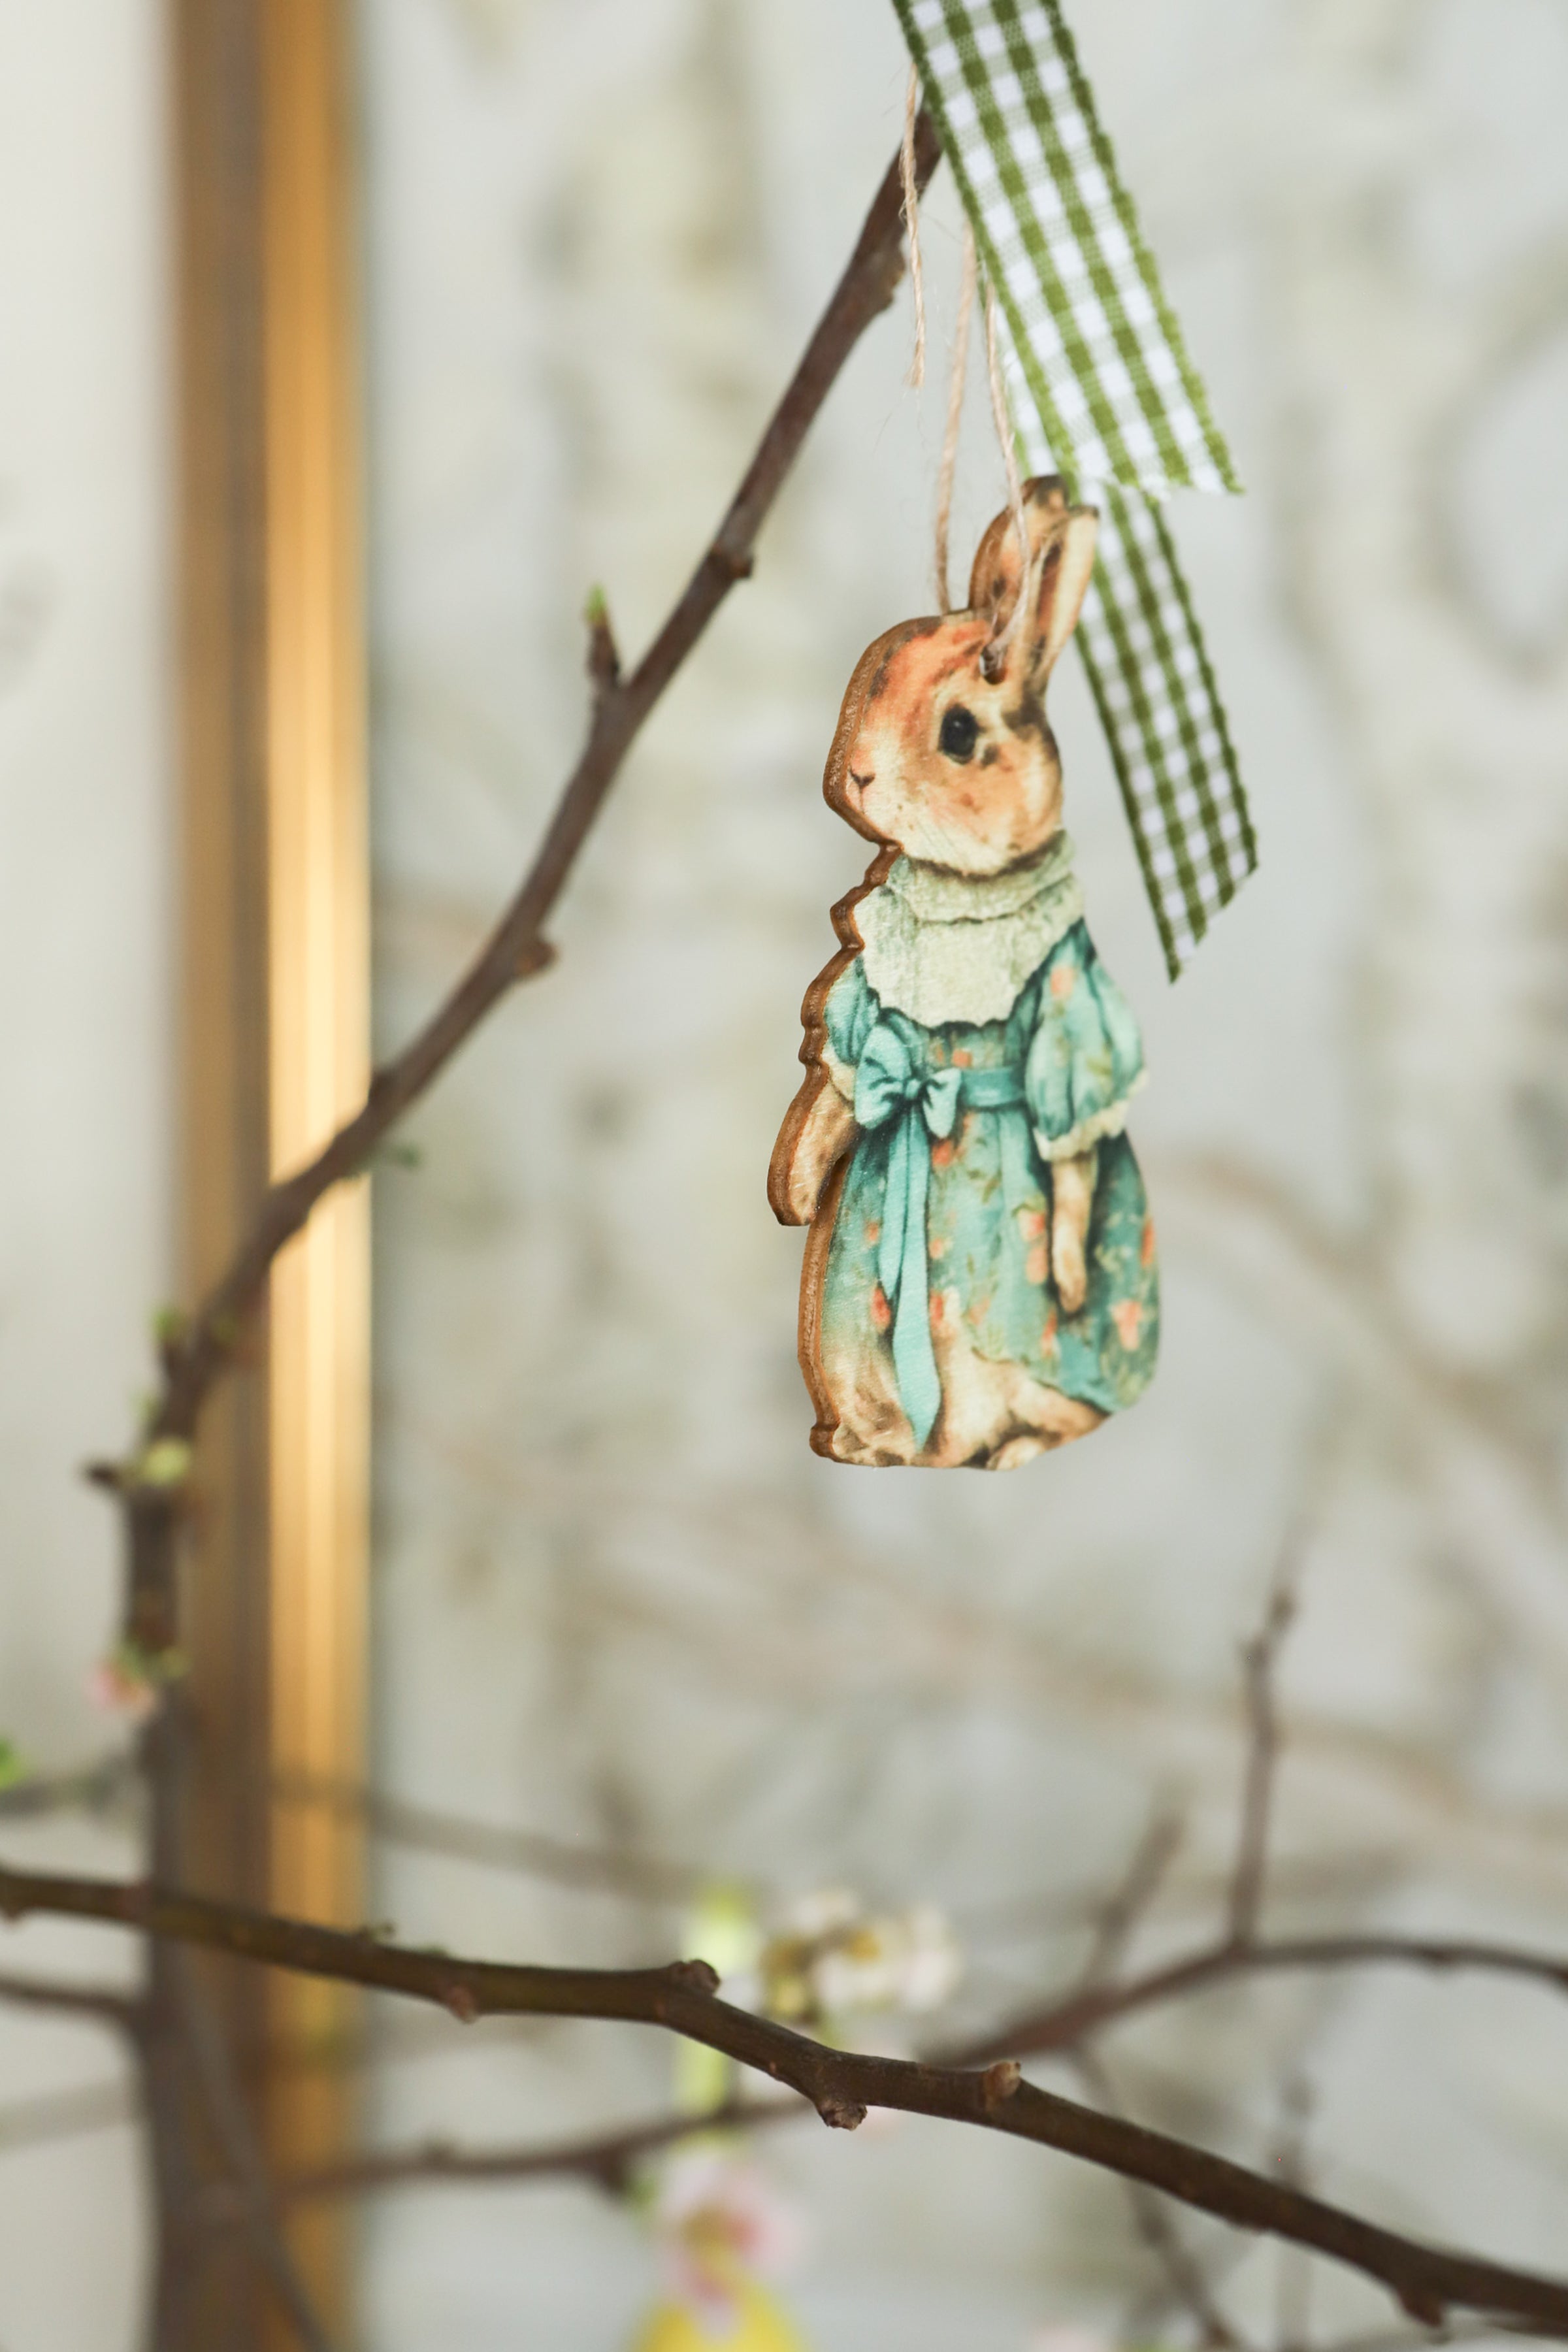 Vintage-Inspired Bunny Ornaments